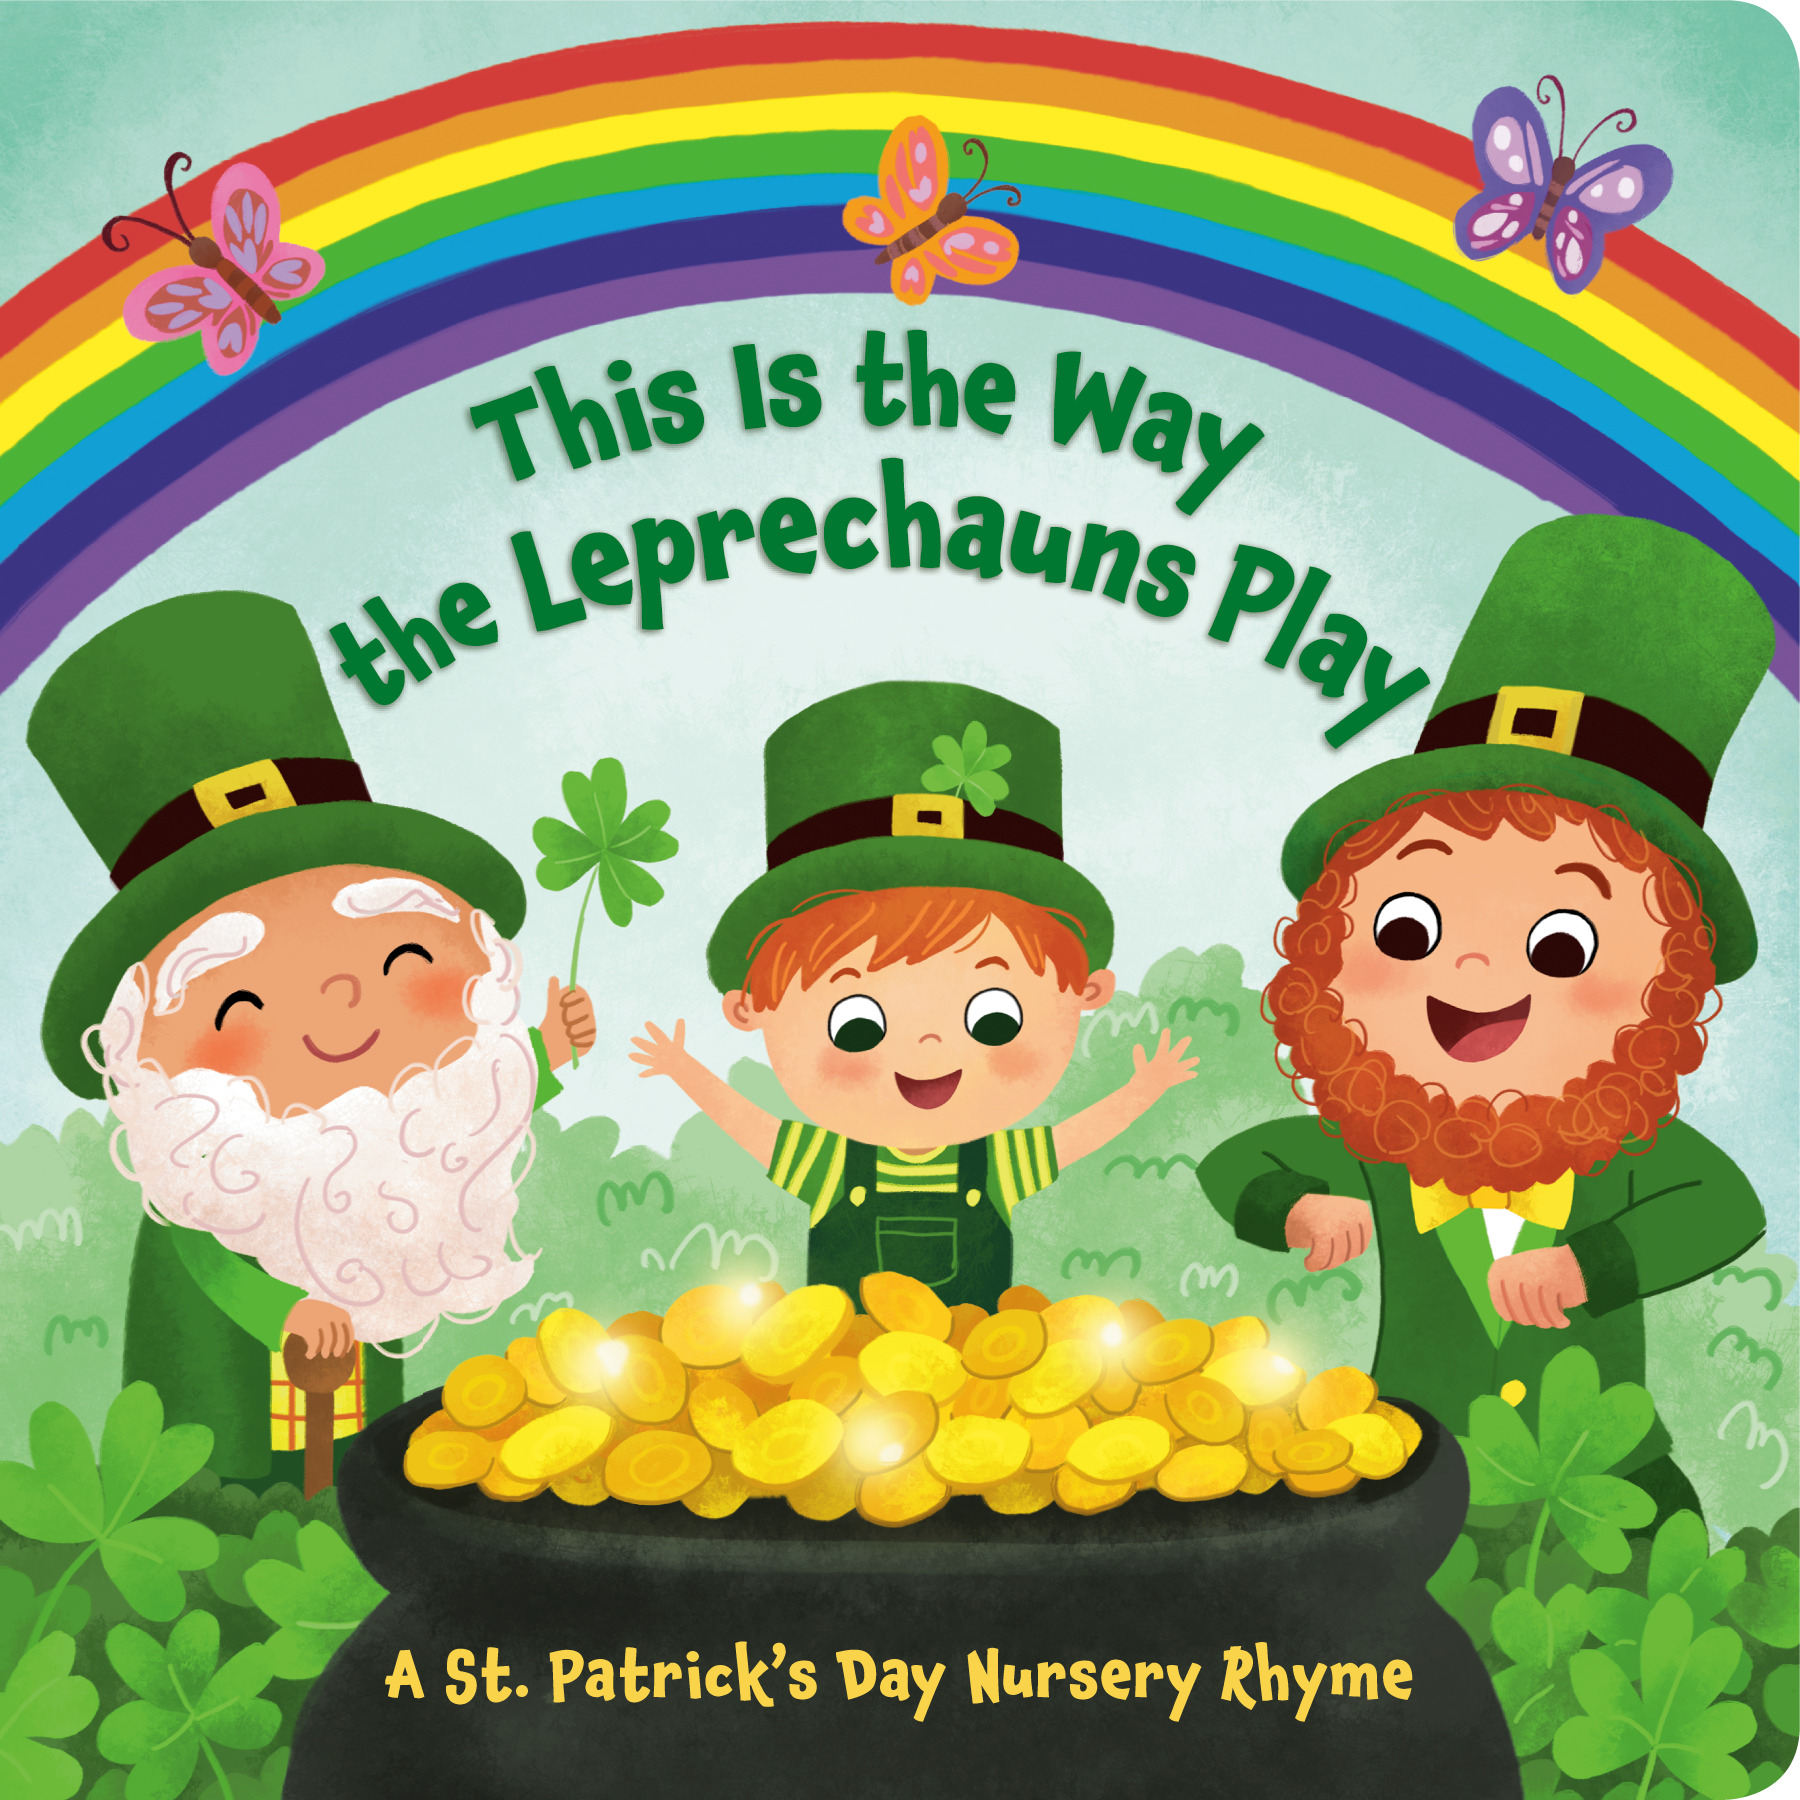 This Is the Way the Leprechauns Play : A St. Patrick's Day Nursery Rhyme | Picture & board books